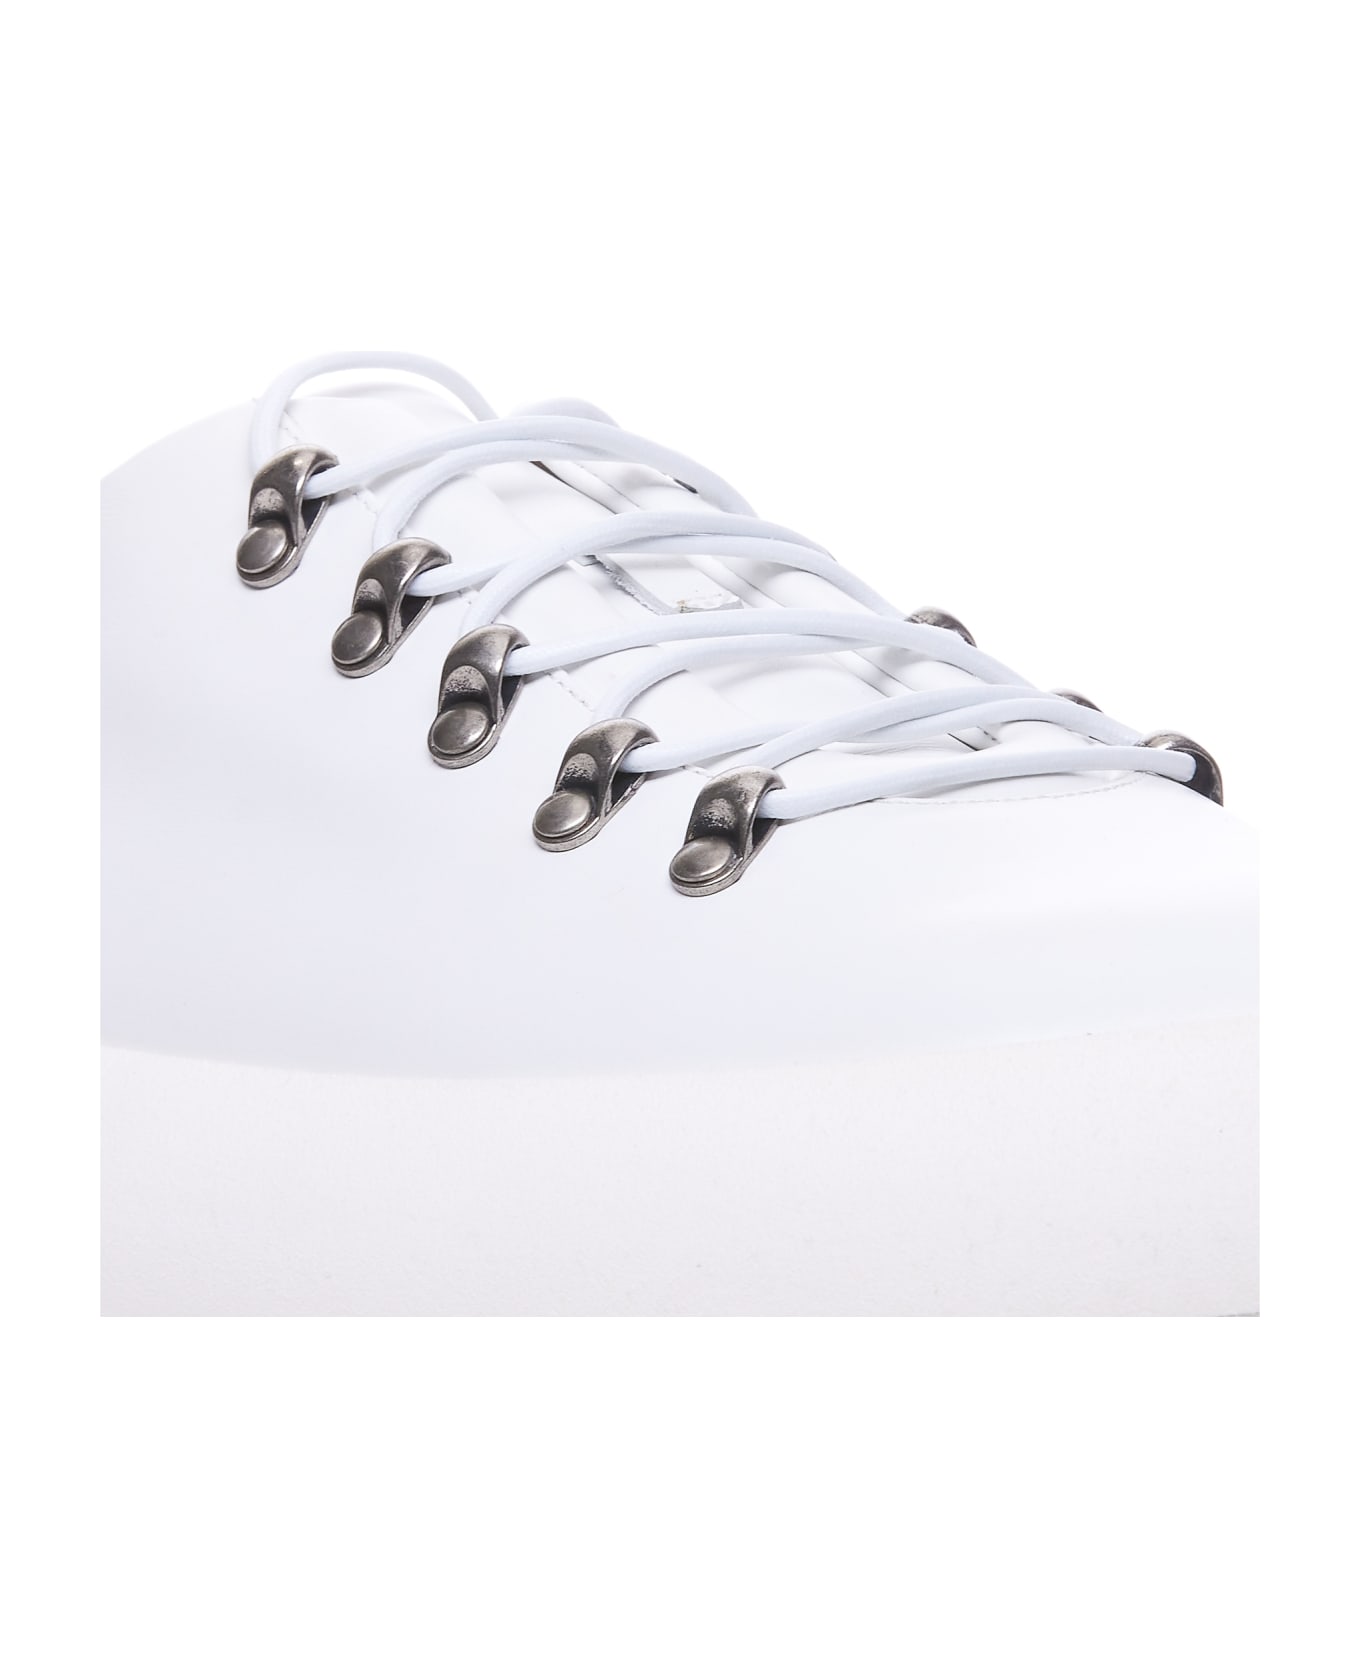 Marsell Espana Lace Up Shoes - White スニーカー